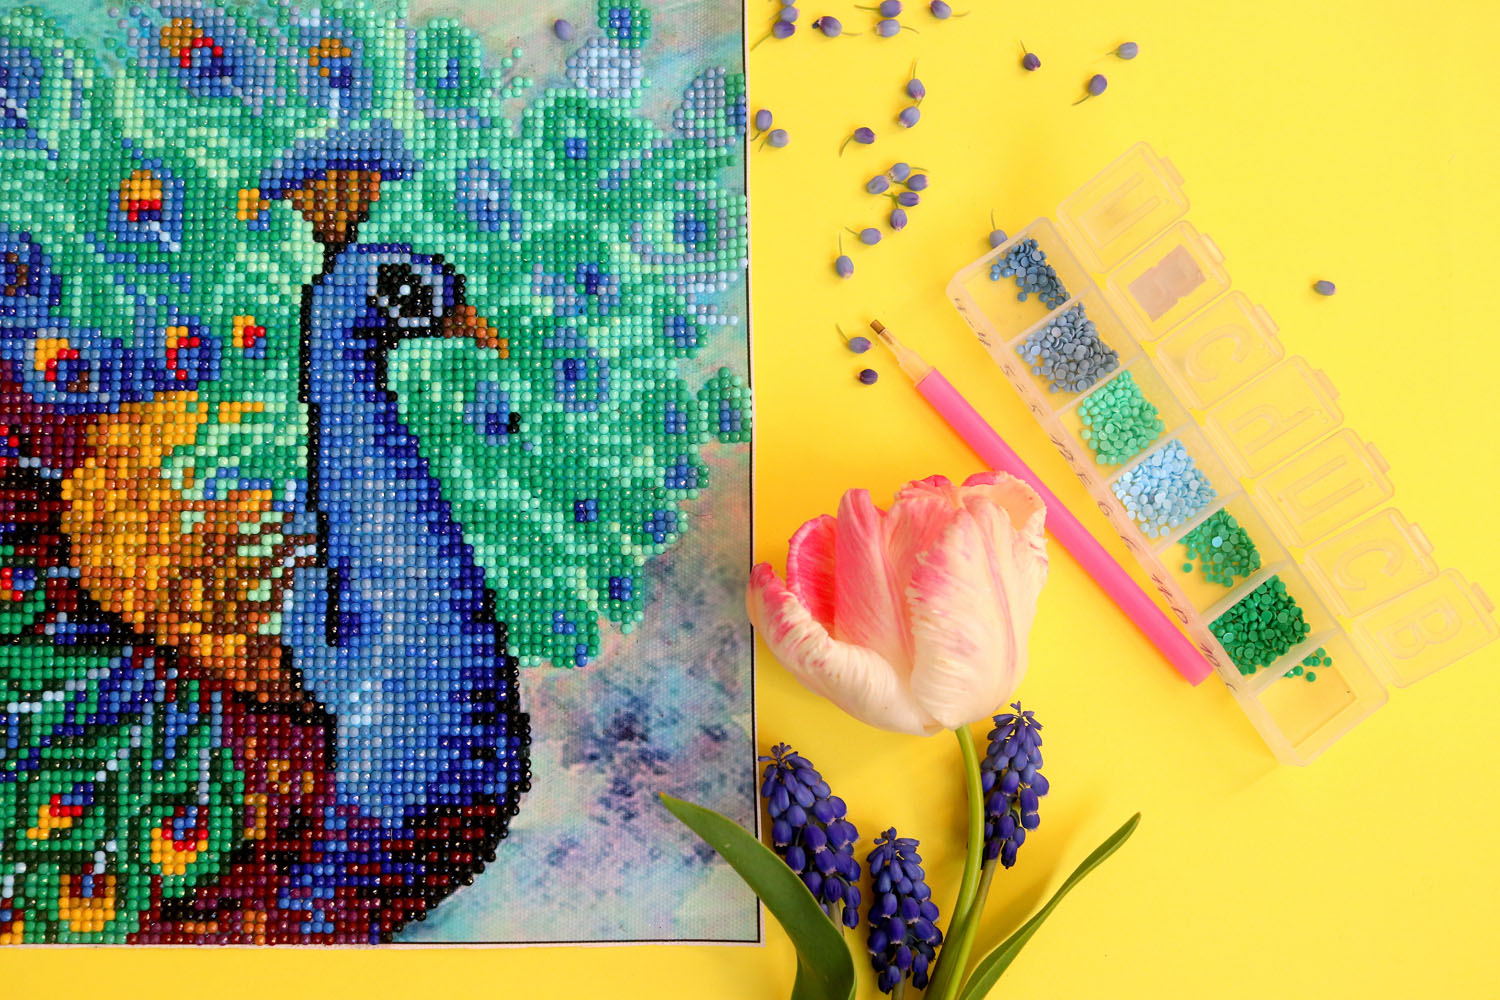 Peacocks in Love-Partial, 5D Diamond Painting Kits